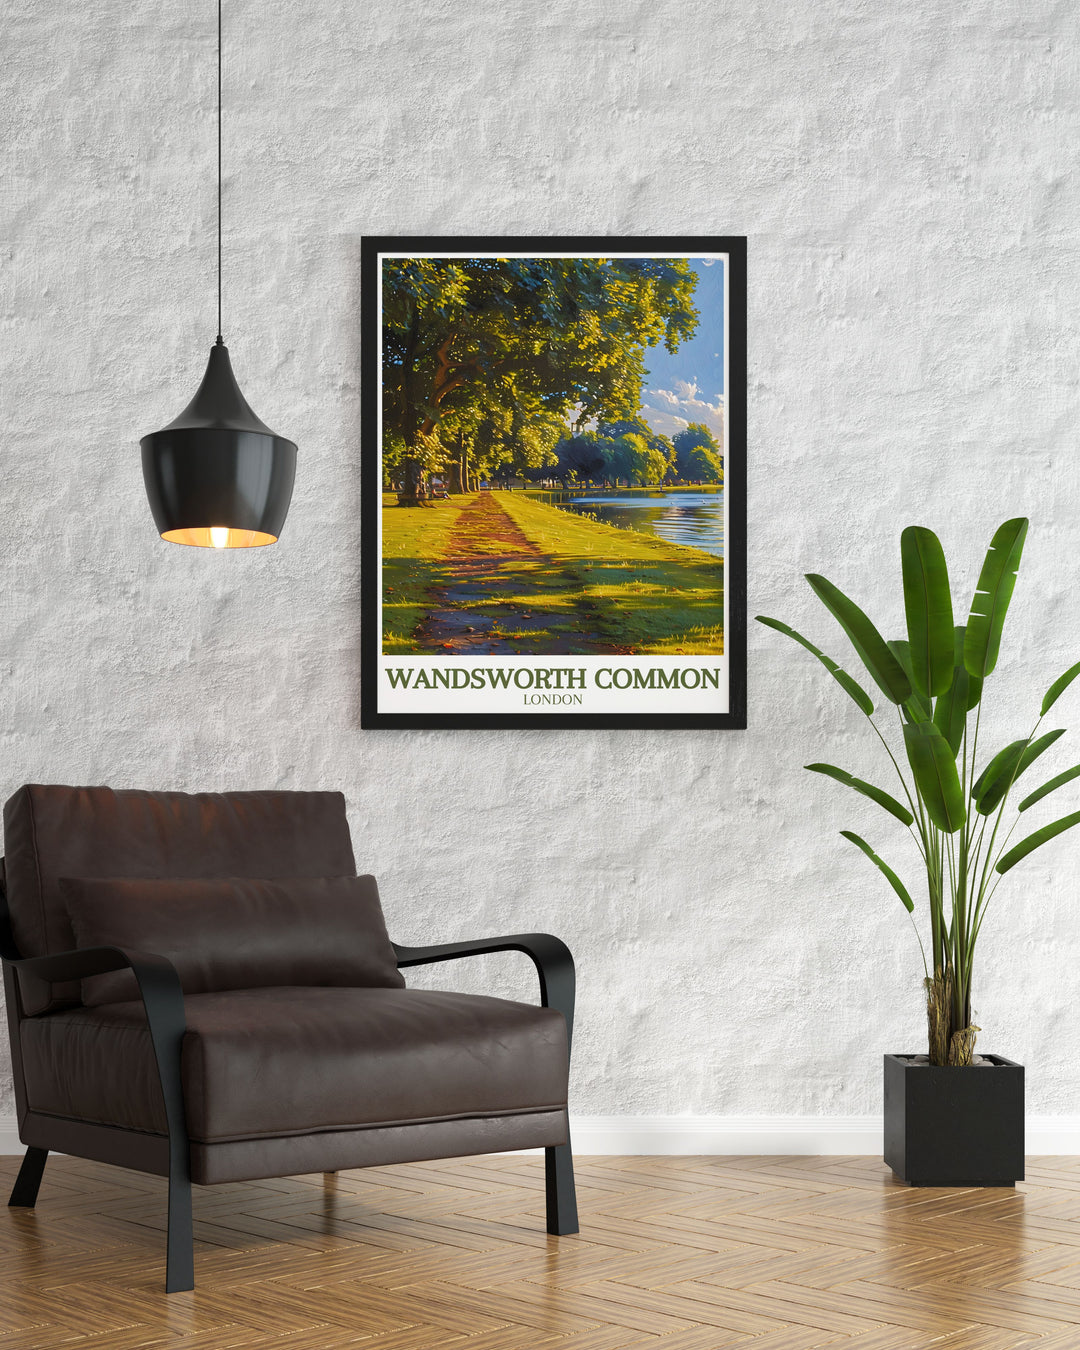 Capture the essence of Wandsworth Common with this stunning London travel poster. Highlighting the lush landscapes and serene atmosphere of Wandsworth Park, this art piece is a great addition to any room for lovers of South London.